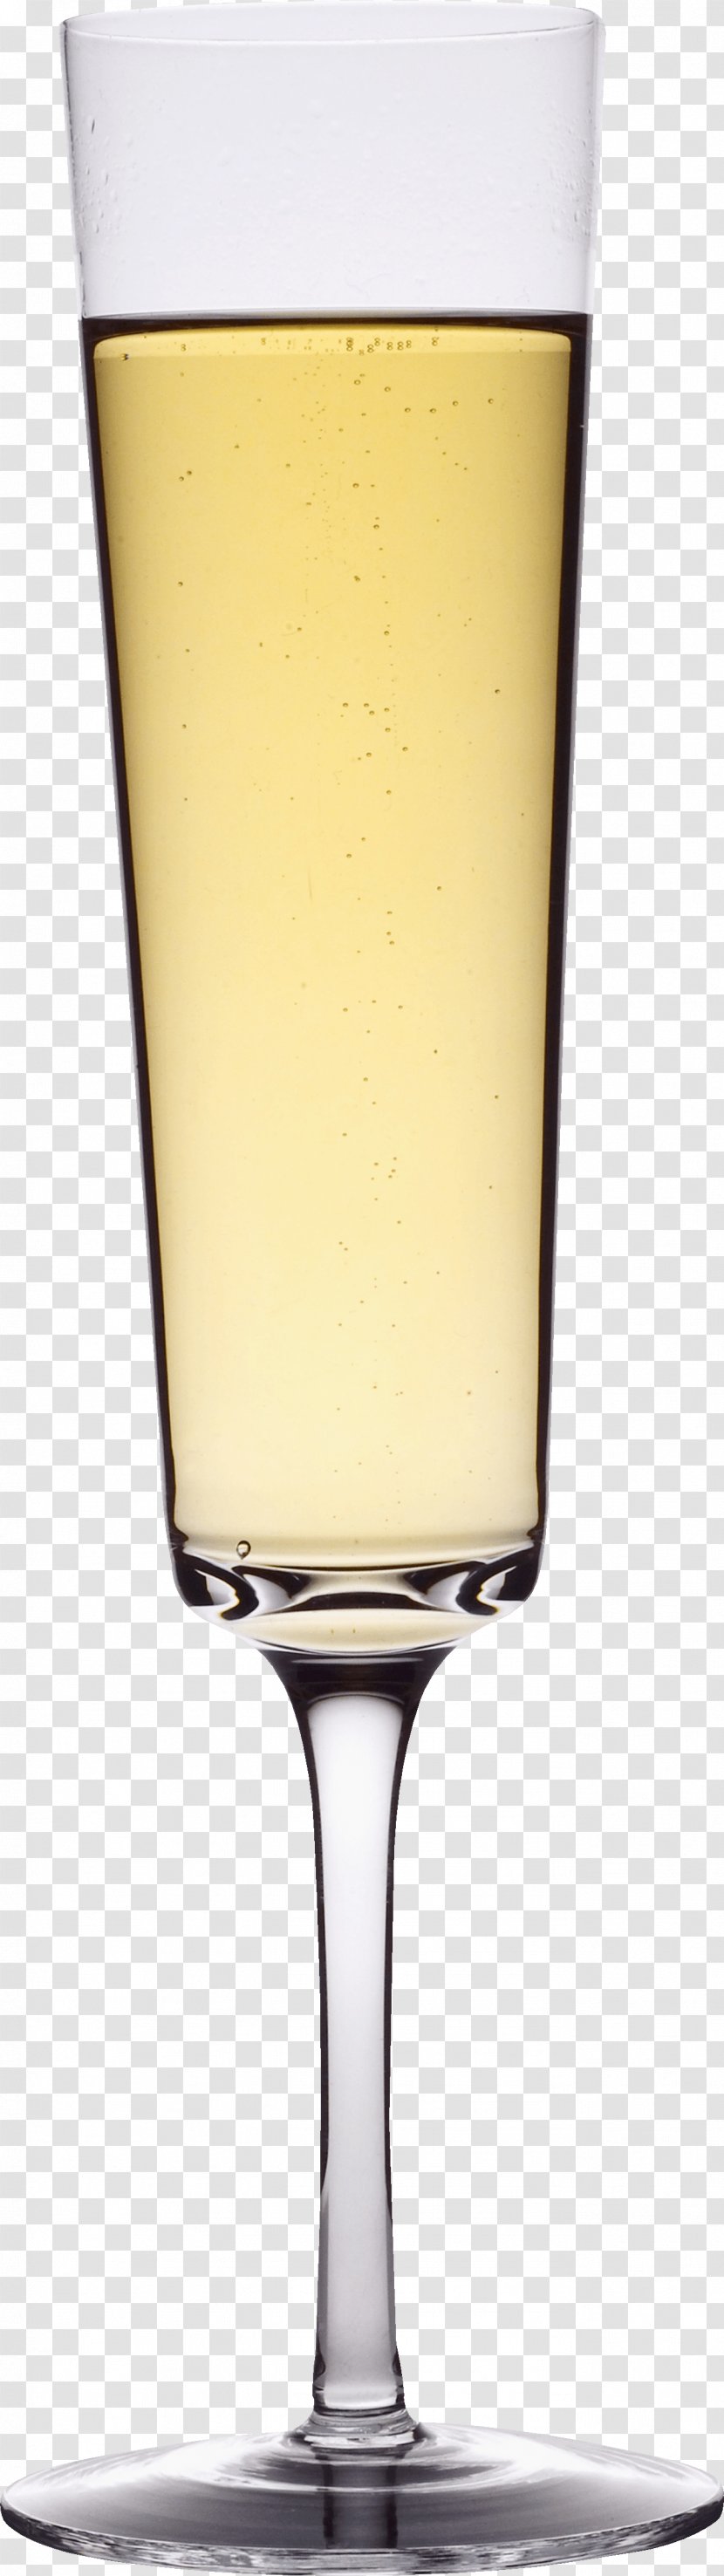 Champagne Cocktail Wine Glass - Image Transparent PNG